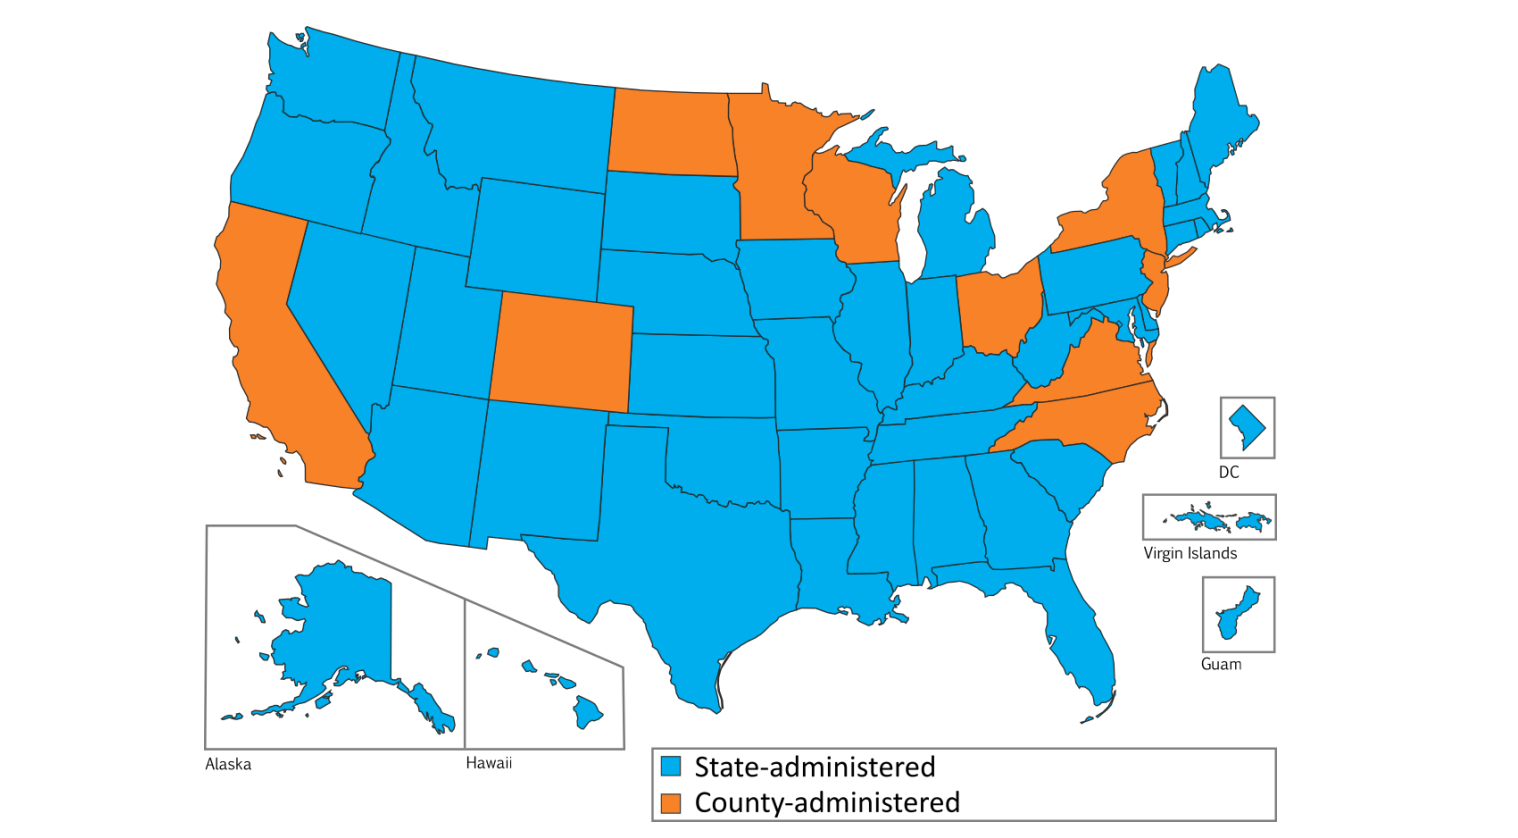 Map of United States and territories, showing 10 states colored orange to indicate county-administered SNAP programs and 43 colored light blue to indicate state-administered SNAP.